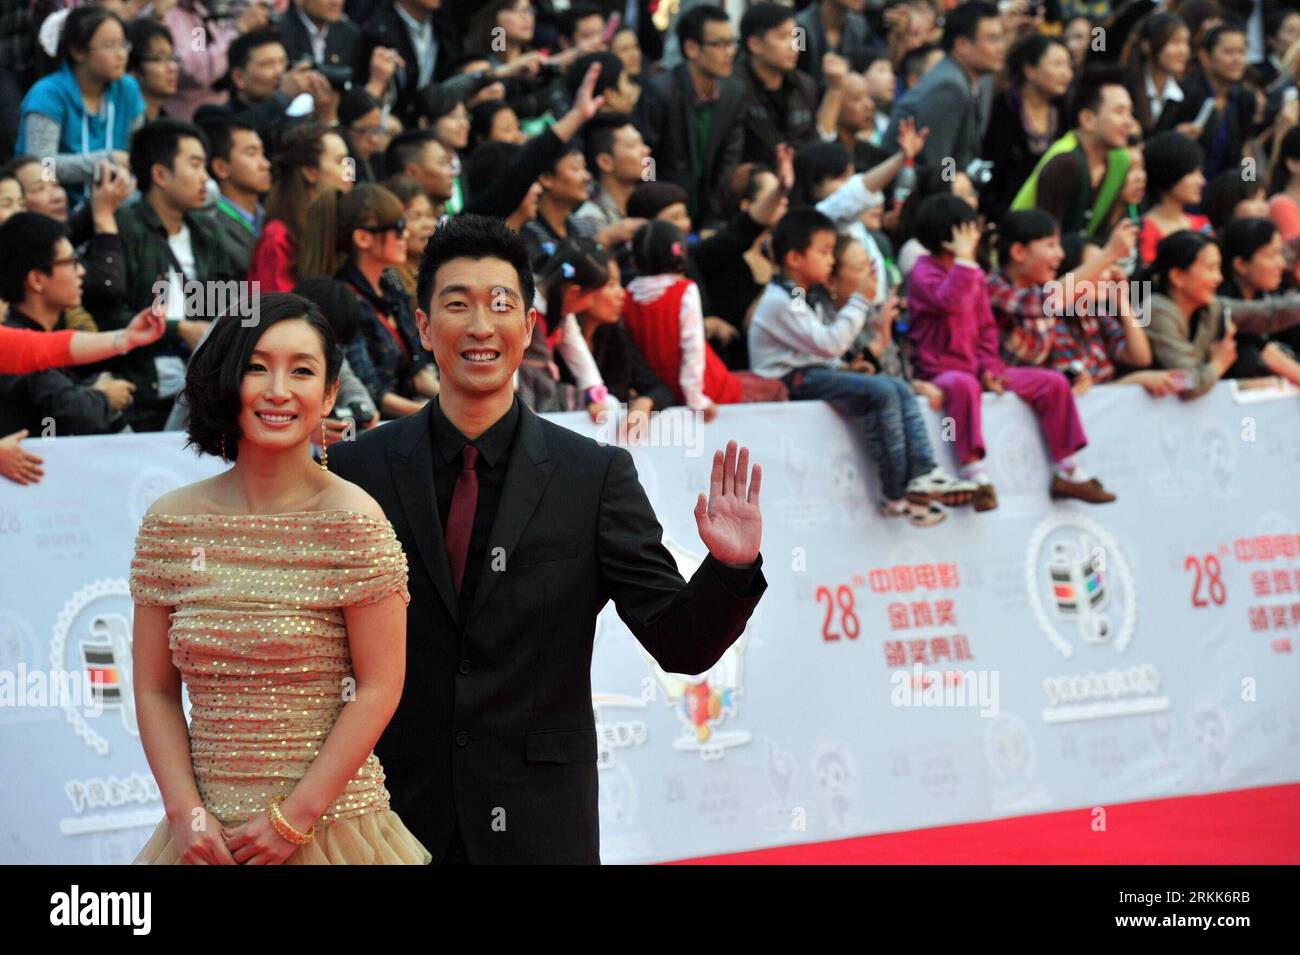 Bildnummer: 56206505  Datum: 22.10.2011  Copyright: imago/Xinhua (111022) -- HEFEI, Oct. 22, 2011 (Xinhua) -- Actor Wang Qianyuan and actress Qin Hailu pose on the red carpet for the closing ceremony of the 20th China Golden Rooster and Hundred Flowers Film Festival at Hefei, east China s Anhui Province, Oct. 22, 2011. The film festival, an annual pageant of Chinese movies, kicked off here on Oct. 19. (Xinhua/Guo Chen) (ry) CHINA-HEFEI-FILM FESTIVAL (CN) PUBLICATIONxNOTxINxCHN People Kultur Entertainment Film Filmfestival xda x0x premiumd 2011 quer      56206505 Date 22 10 2011 Copyright Imago Stock Photo